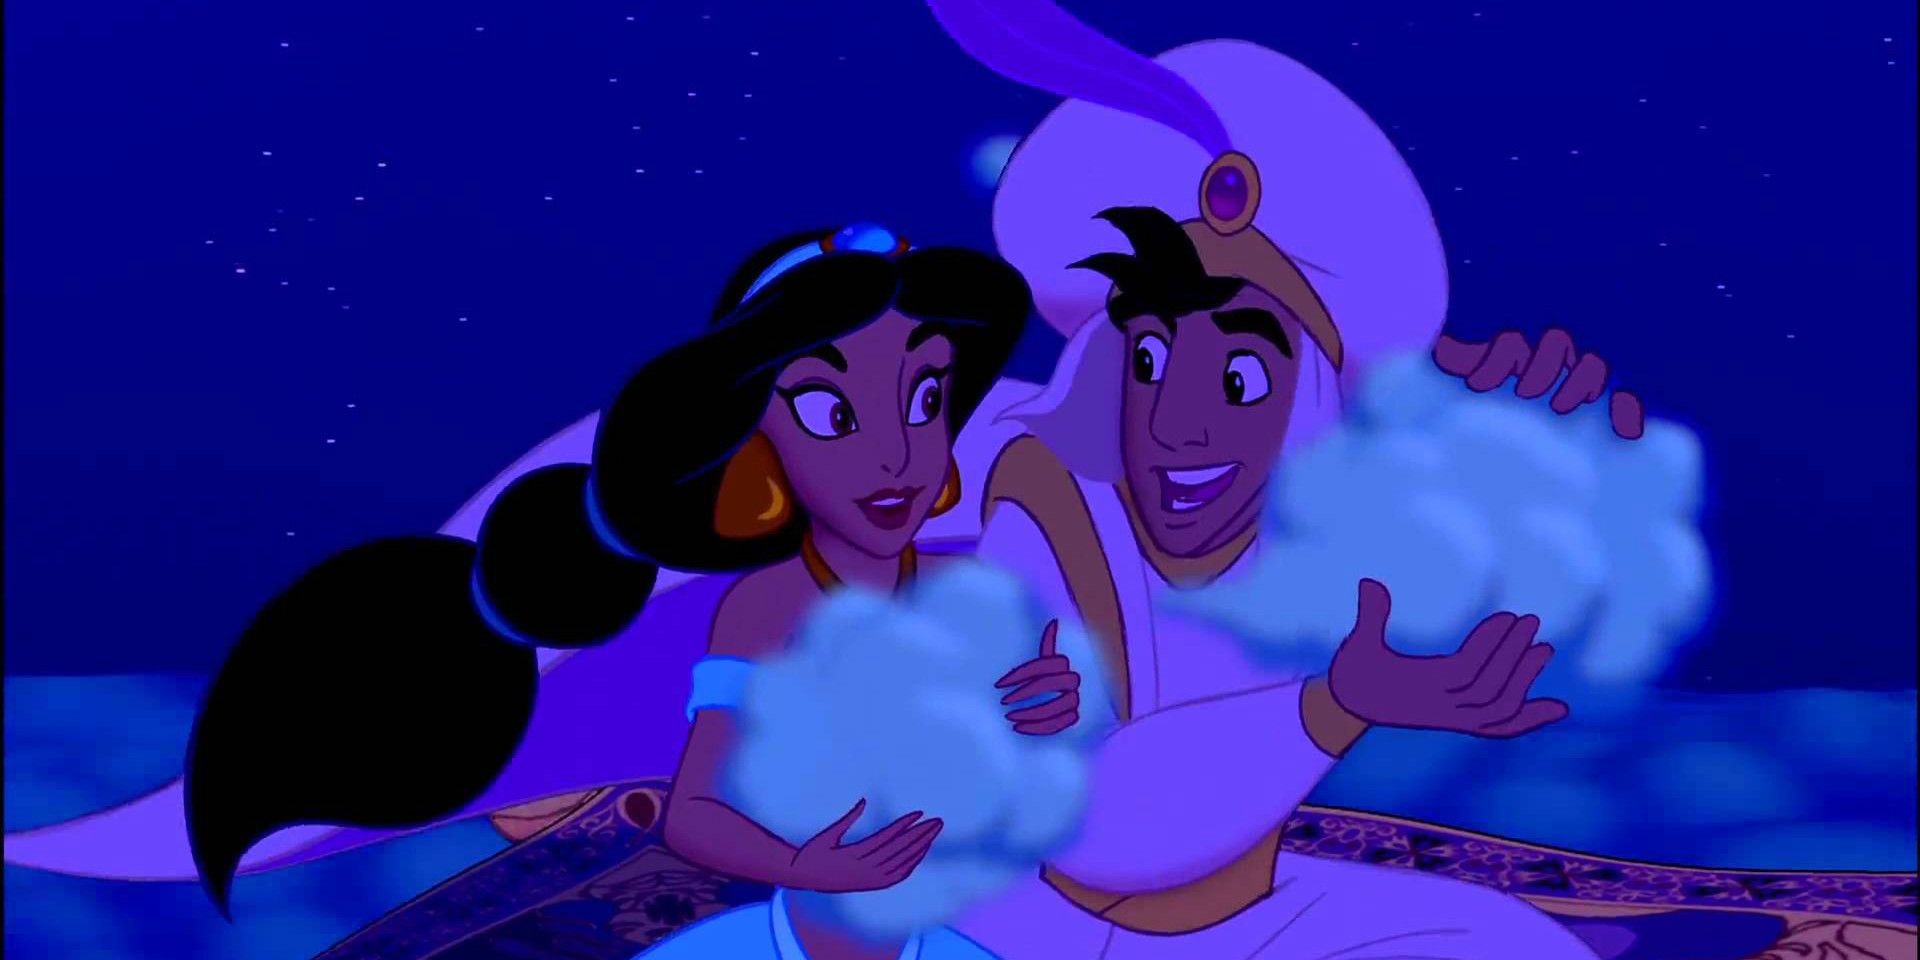 Jasmine and Aladdin holding clouds during A Whole New World Song in Aladdin.